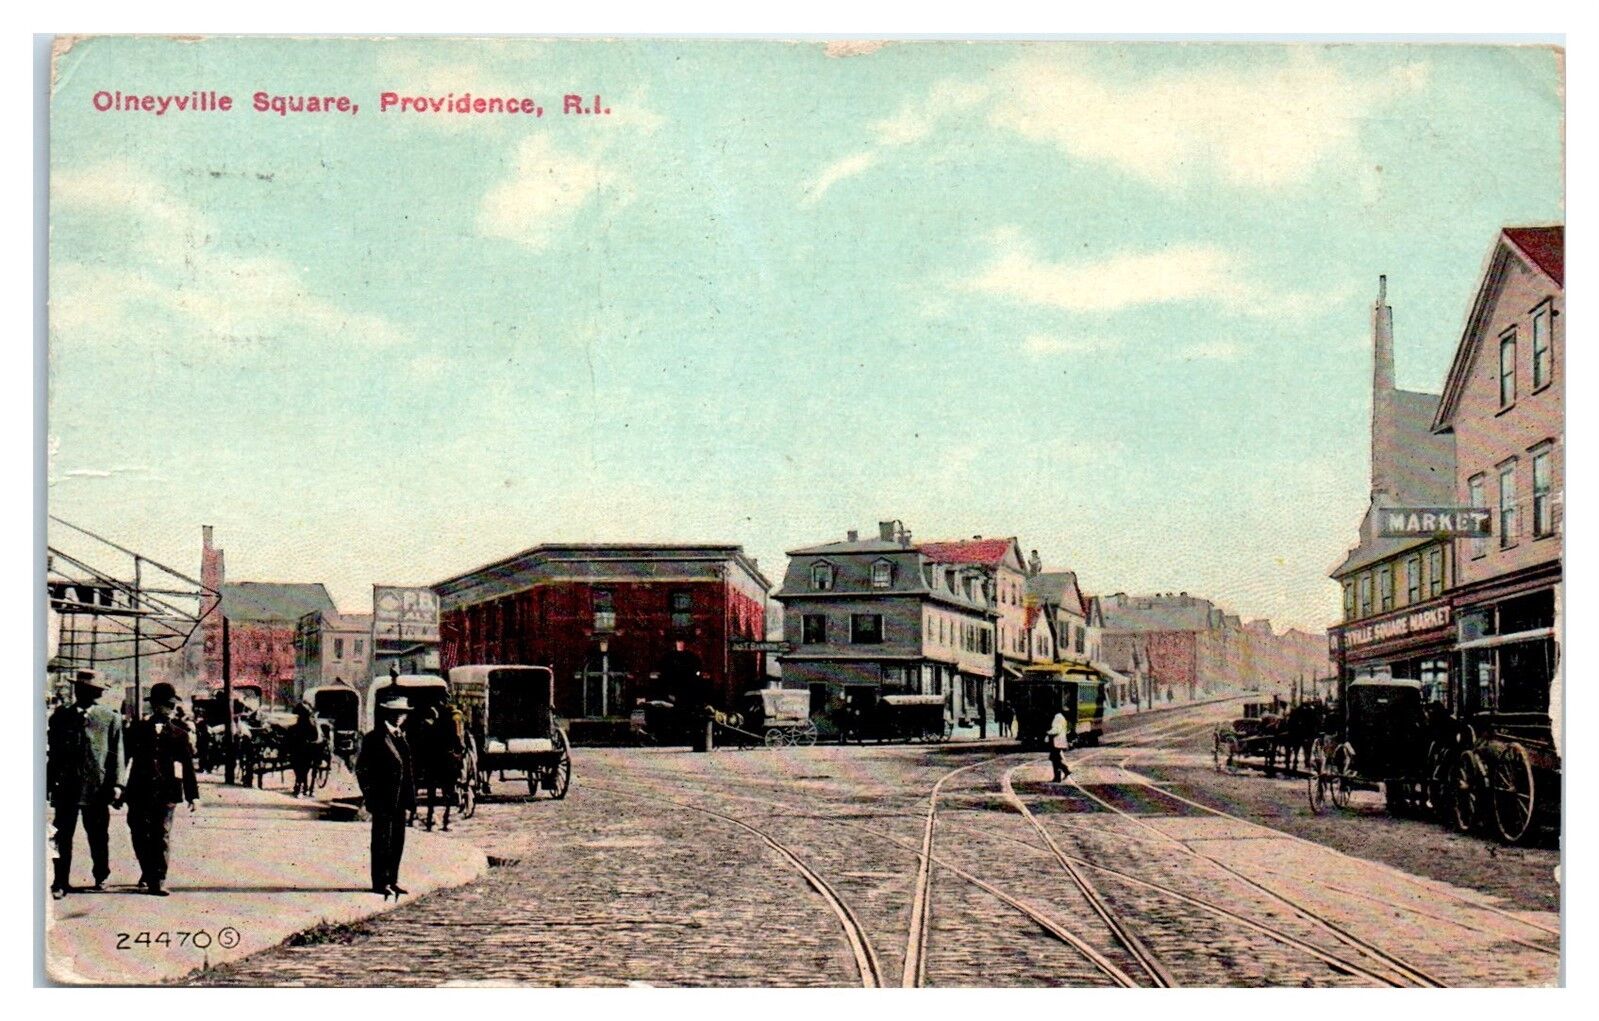 1911 Olneyville Square, Trolley and Horse-Drawn Wagons, Providence, RI Postcard